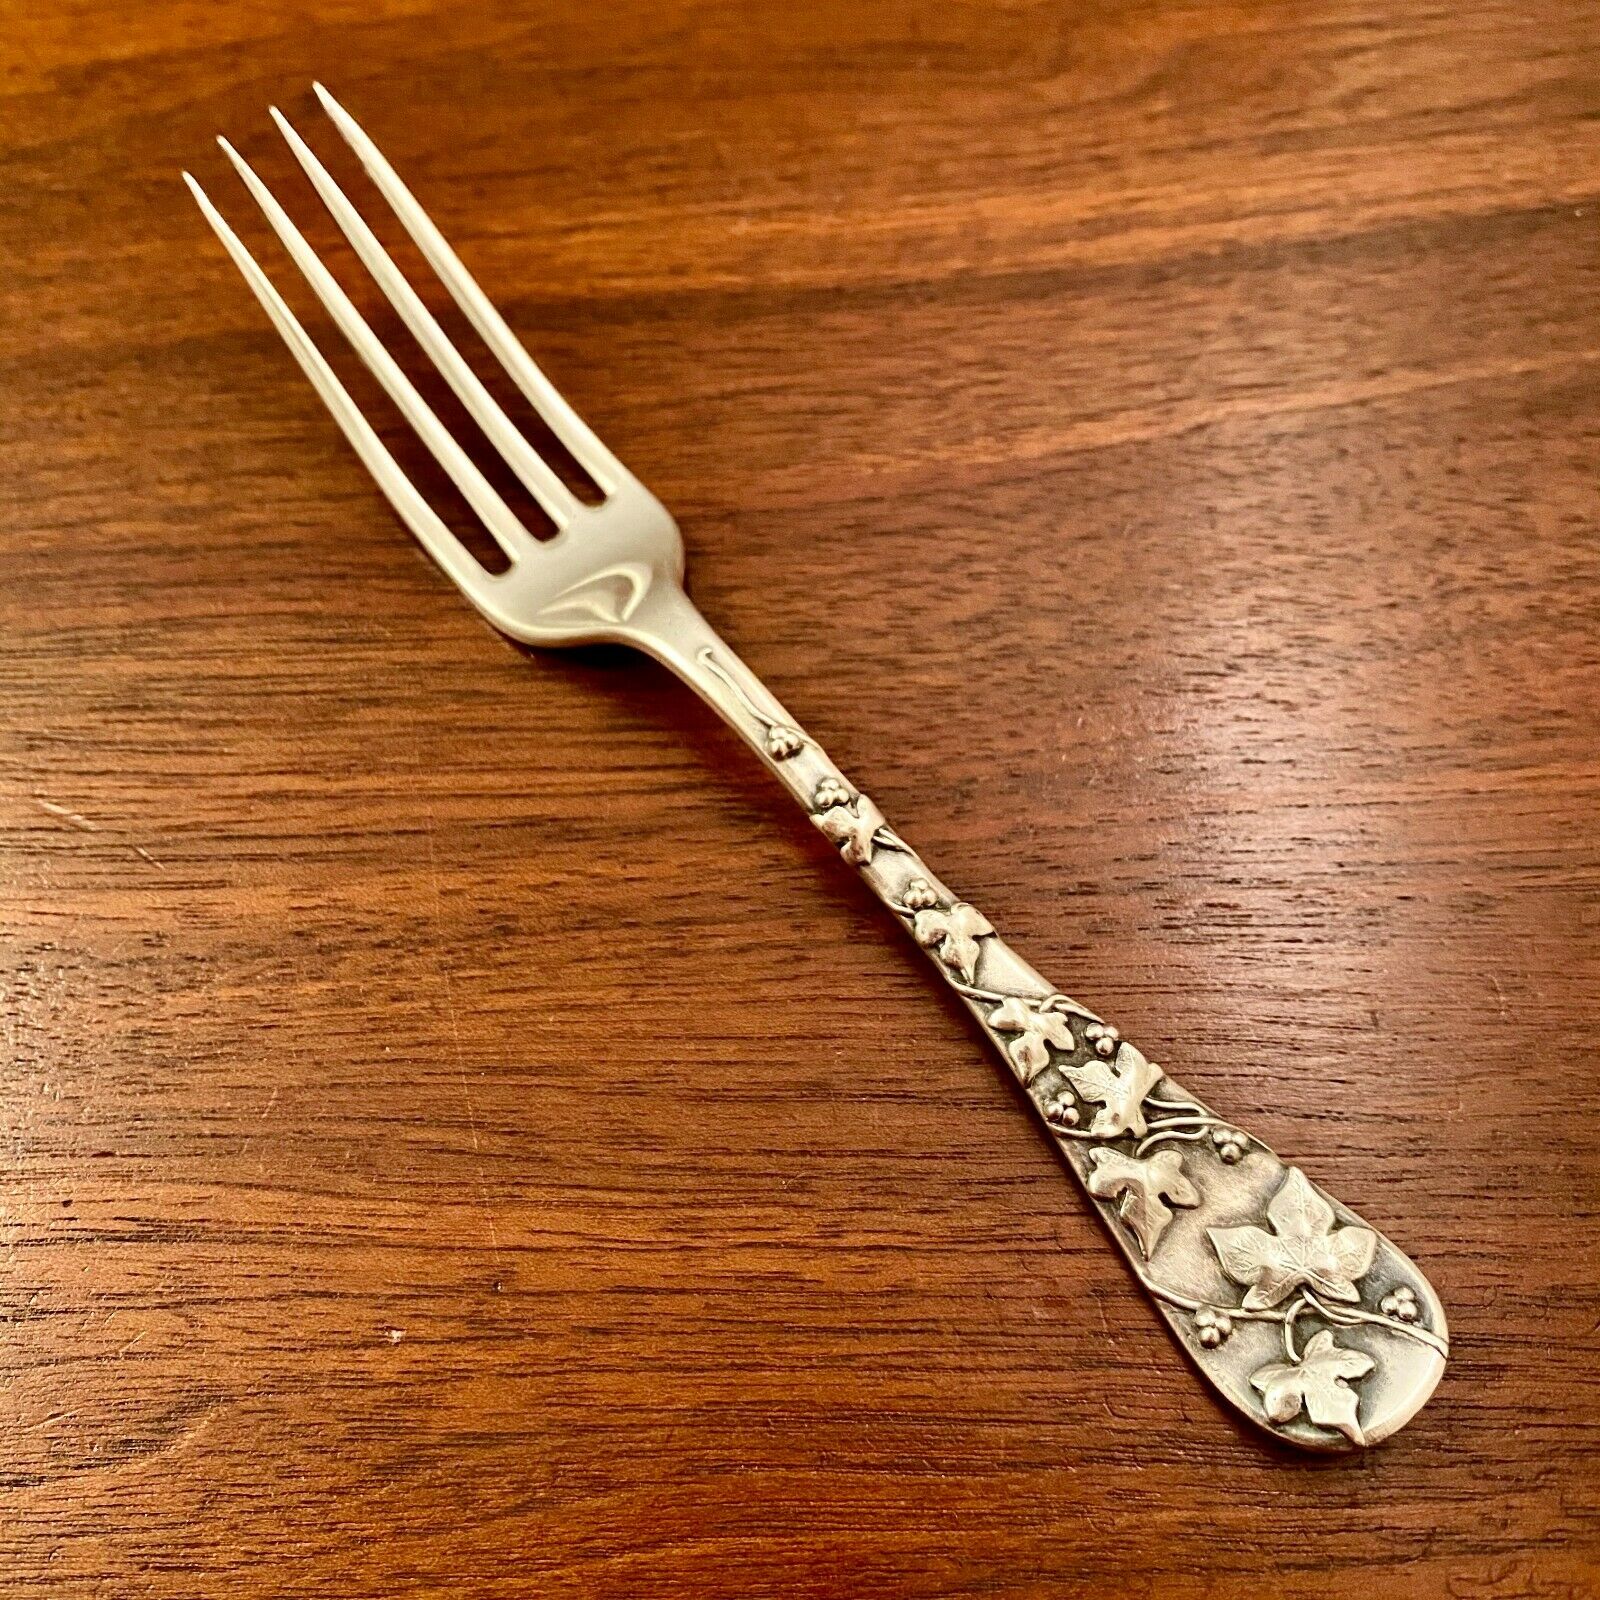 Antique Valuations: RARE TIFFANY AESTHETIC STERLING SILVER DESSERT FORK: APPLIED VINE & CURRANT